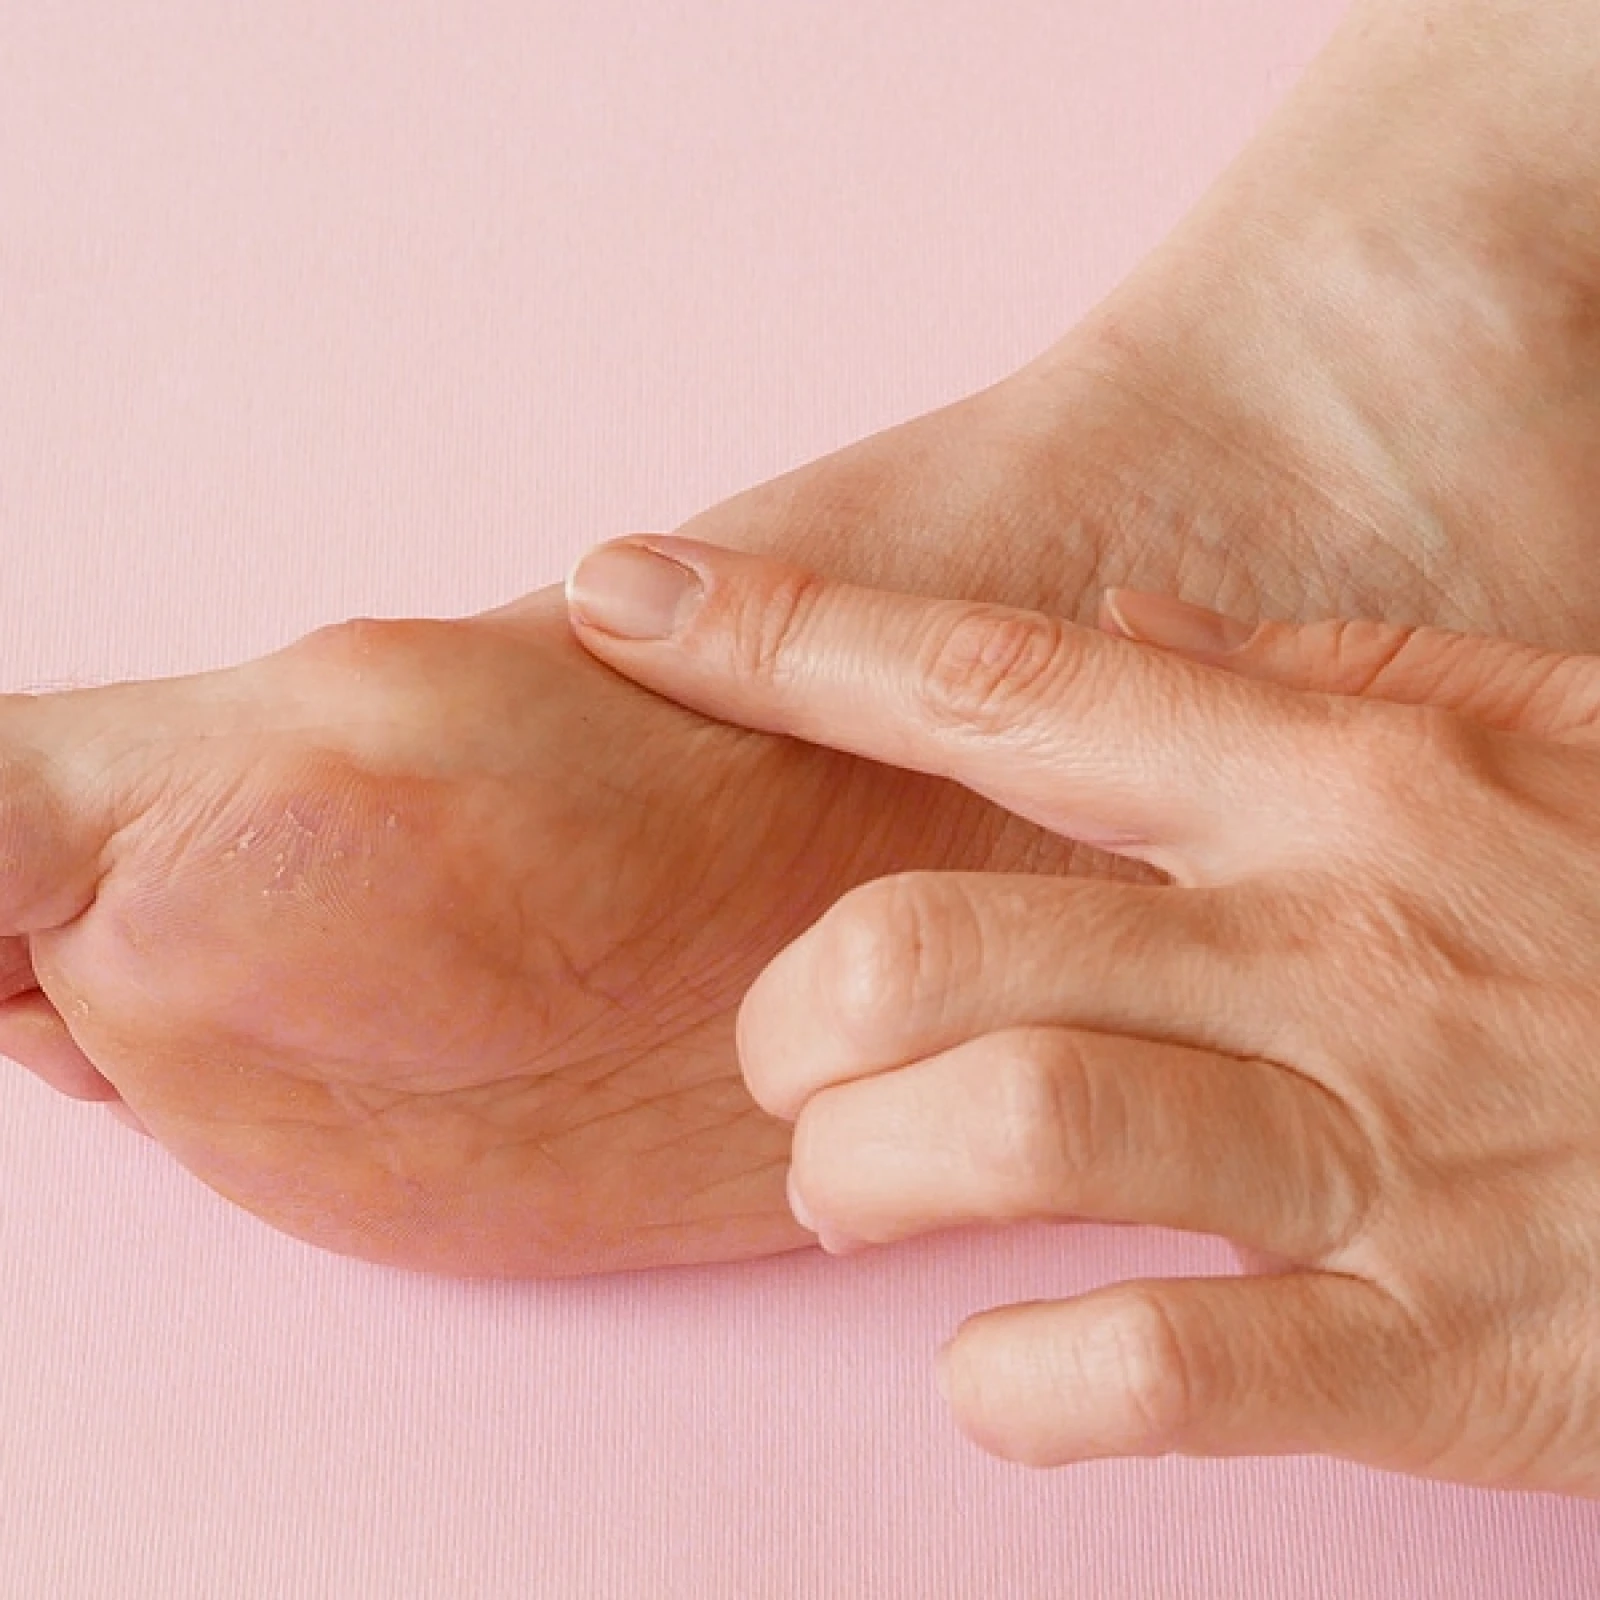 How Do I Know If I Have a Bunion?